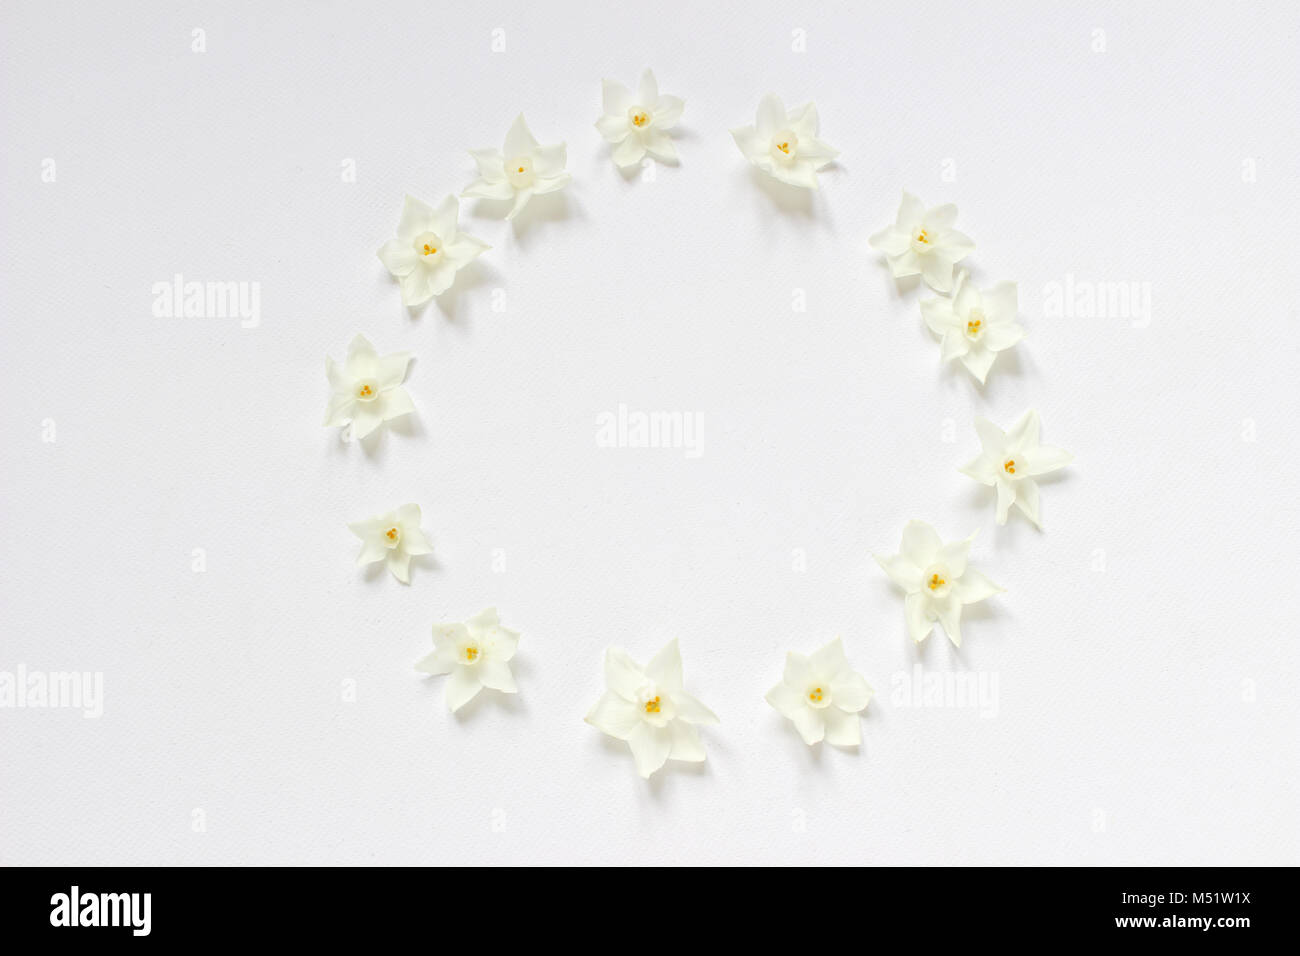 Styled stock photo. Spring, Easter feminine scene floral composition. Round frame wreath pattern made of narcissus, daffodil flowers. White background. Flat lay, top view. Stock Photo